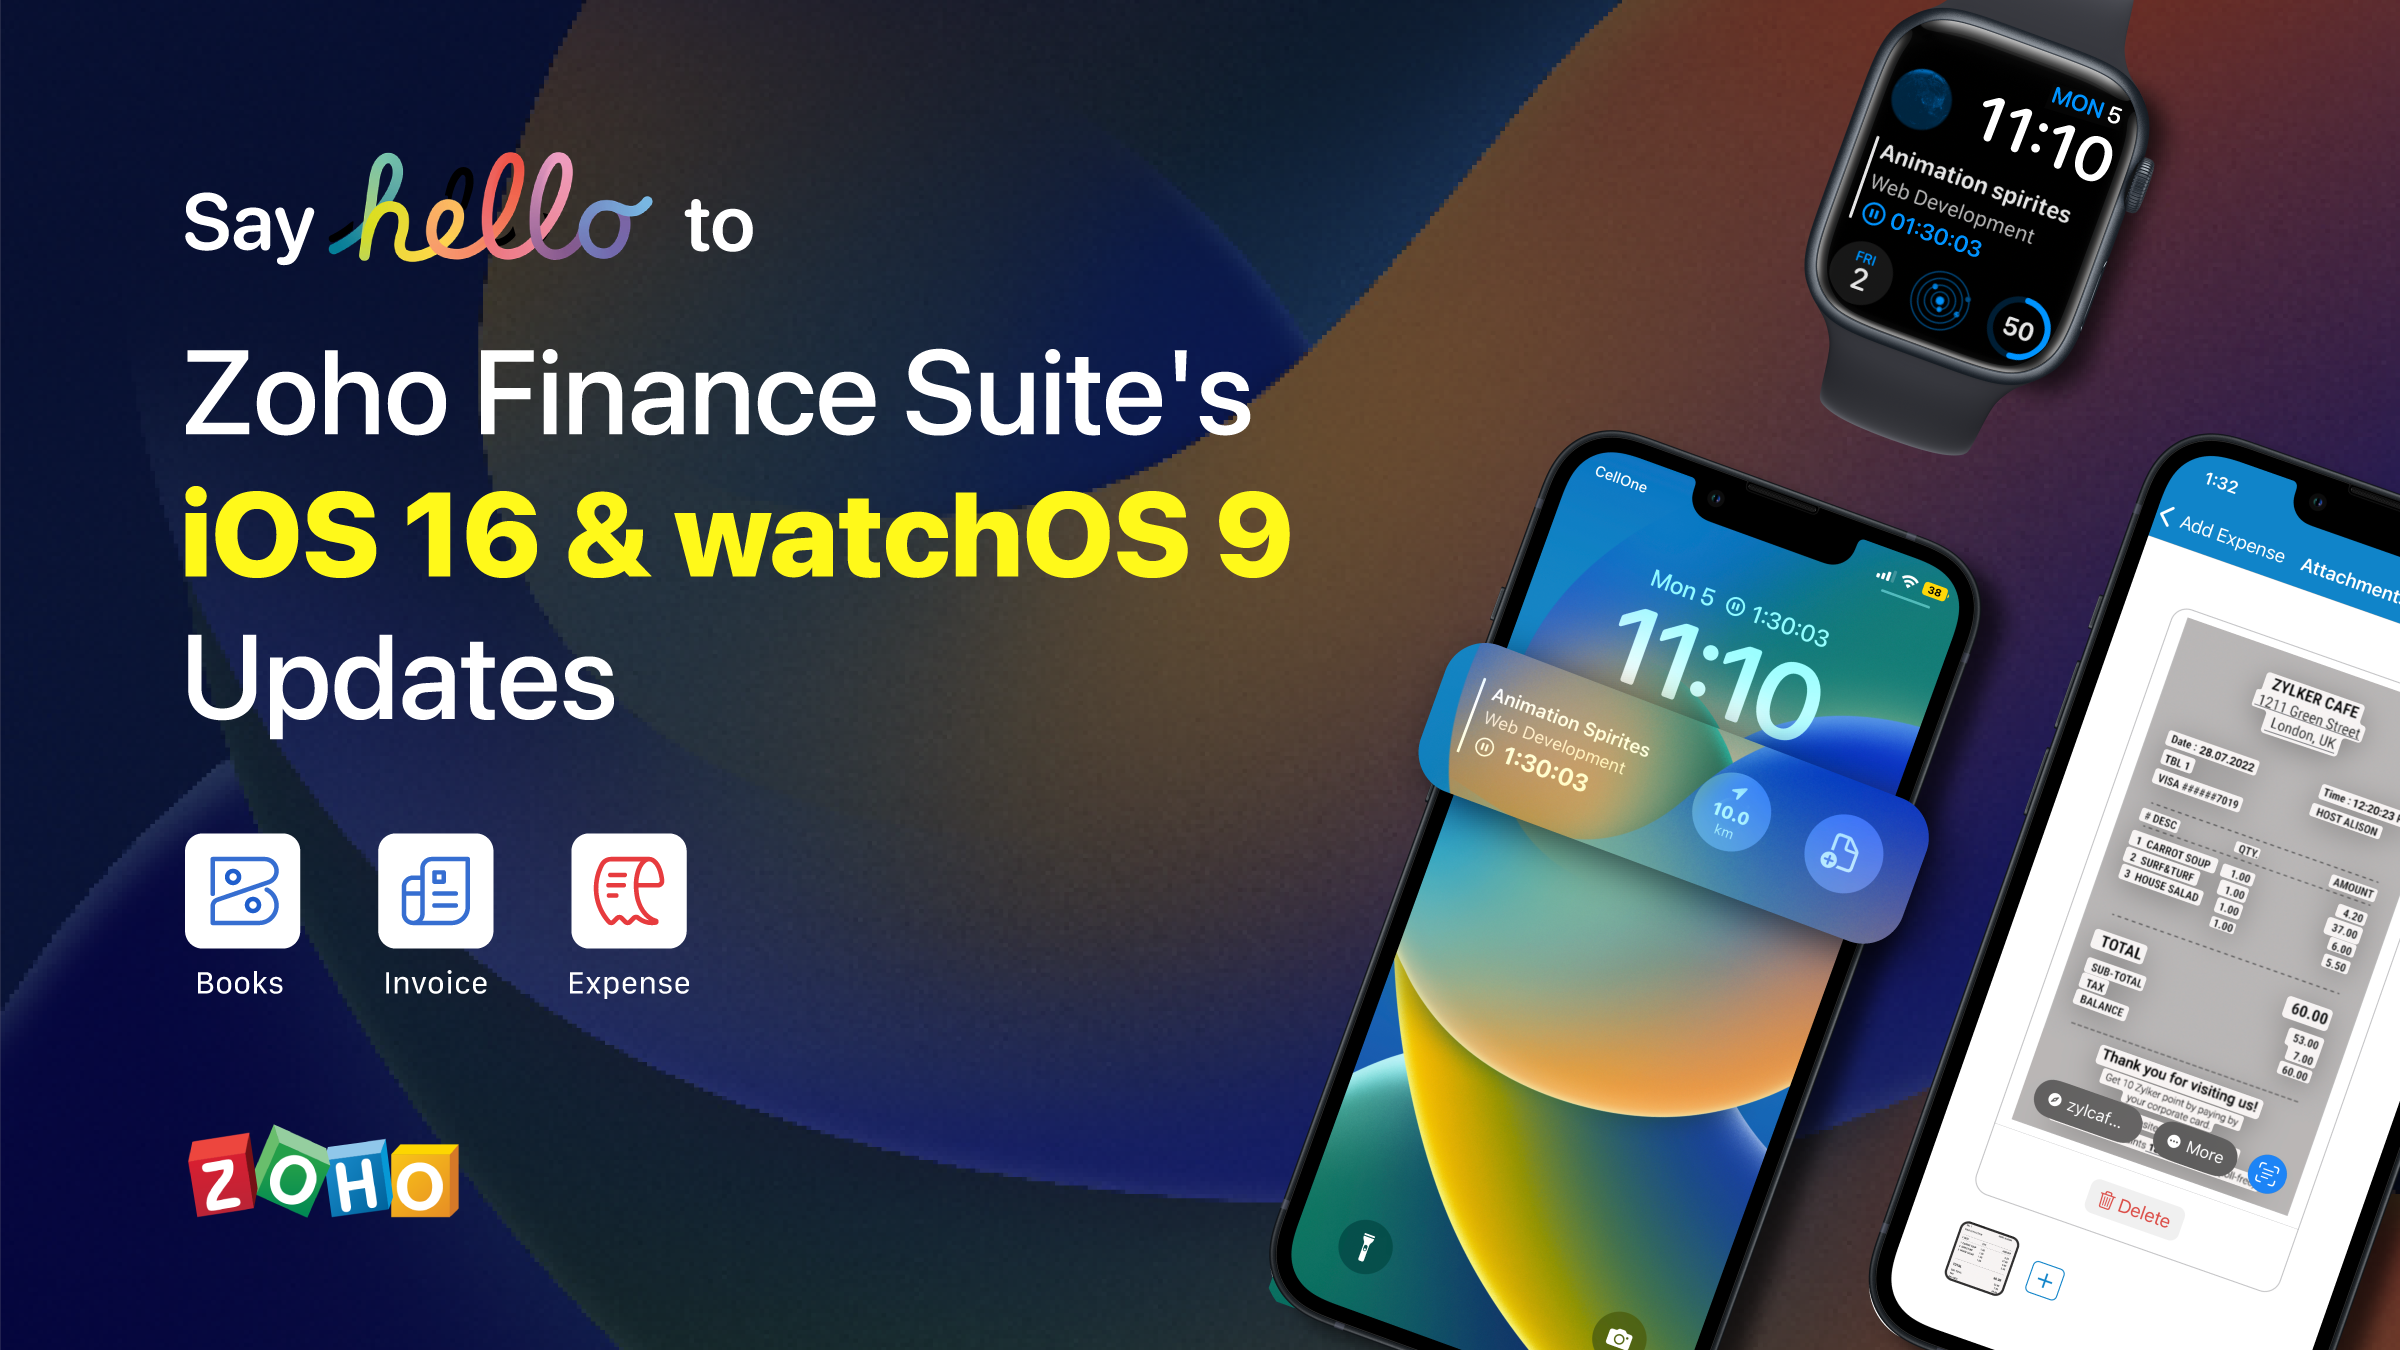 Everything You Need To Know About Zoho Finance Suite’s iOS 16 and watchOS 9 Updates From WWDC 2022!